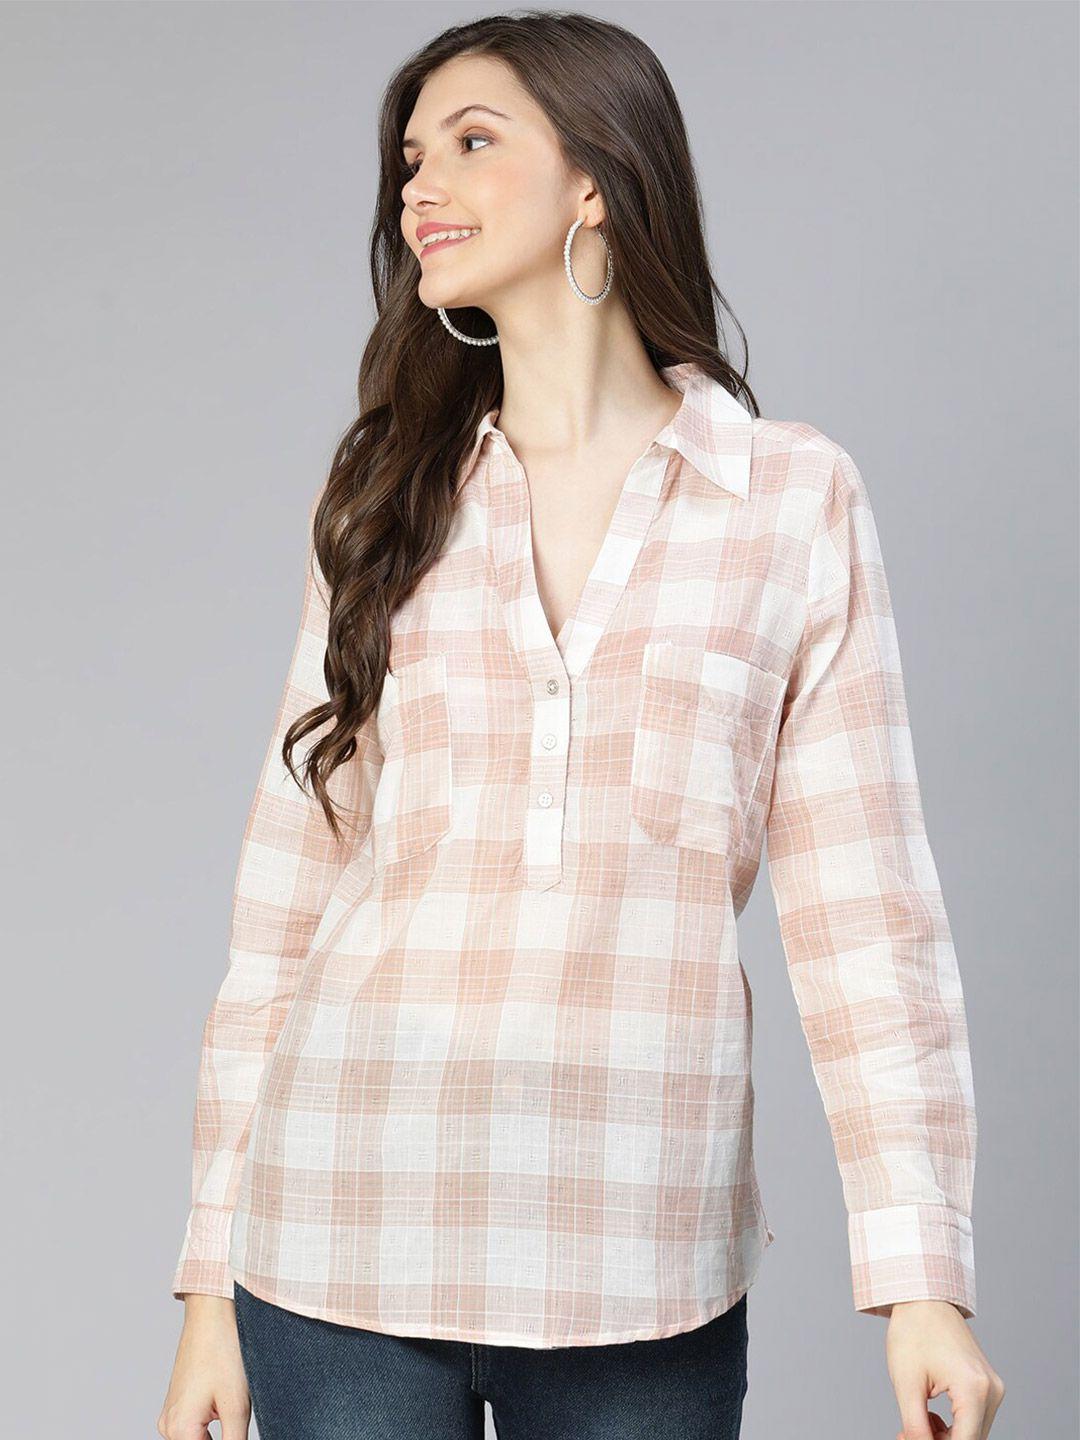 oxolloxo brown checked shirt style top